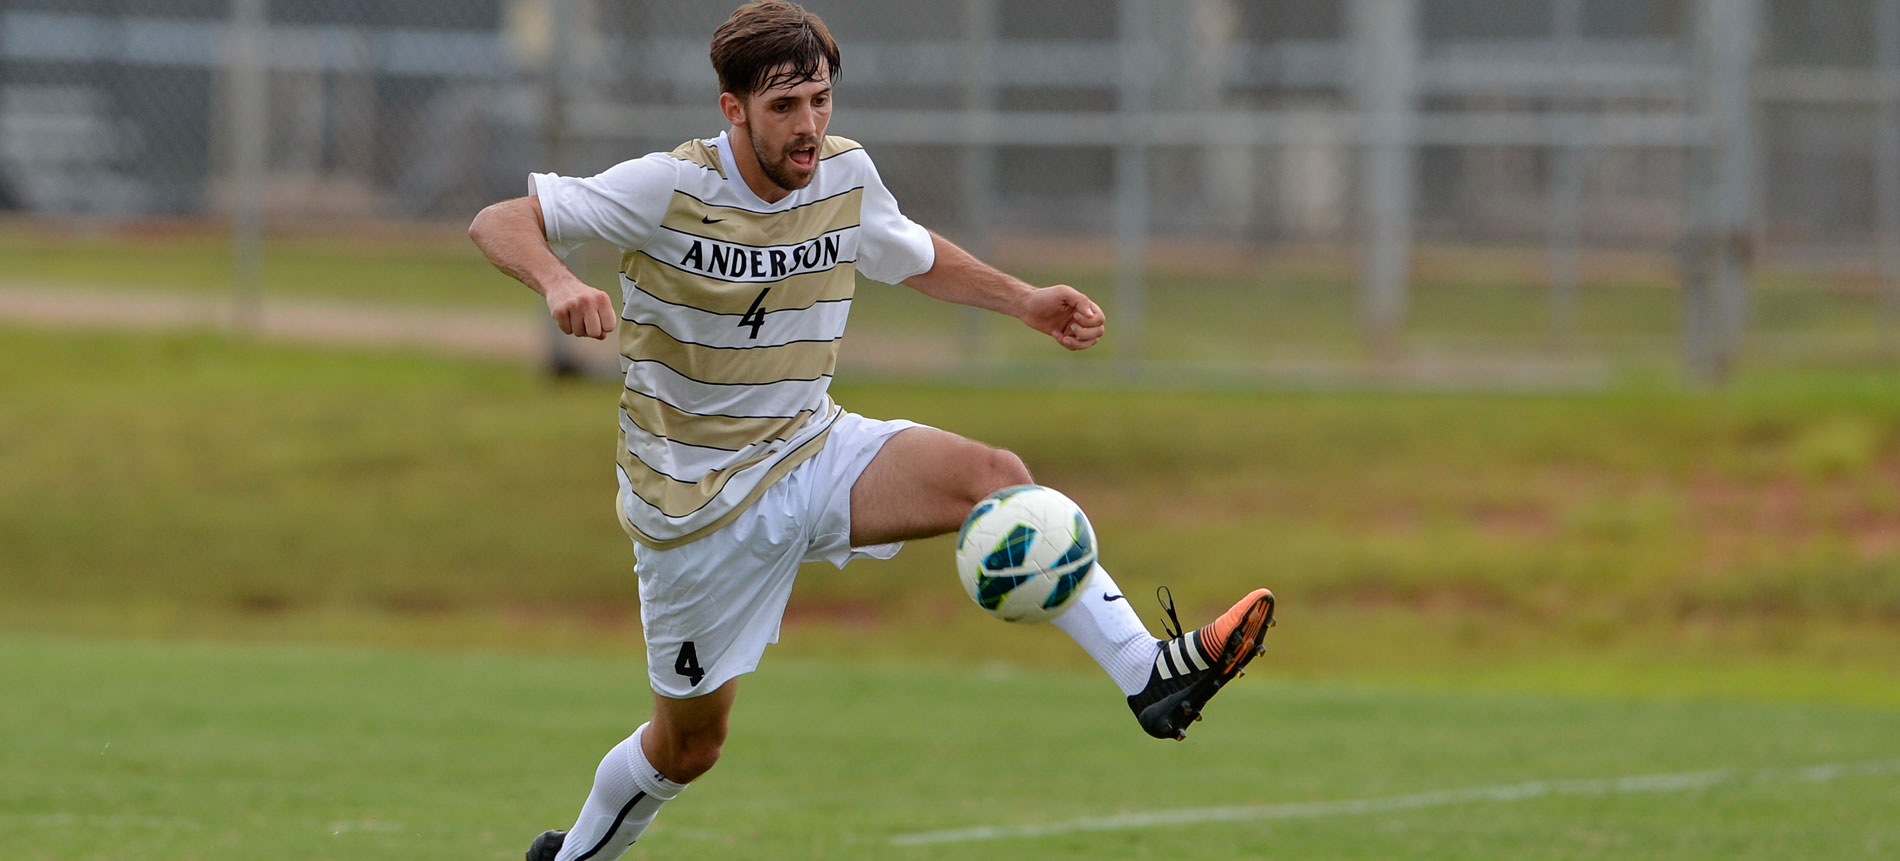 Trojans Fall at Home to Wingate; 3-1